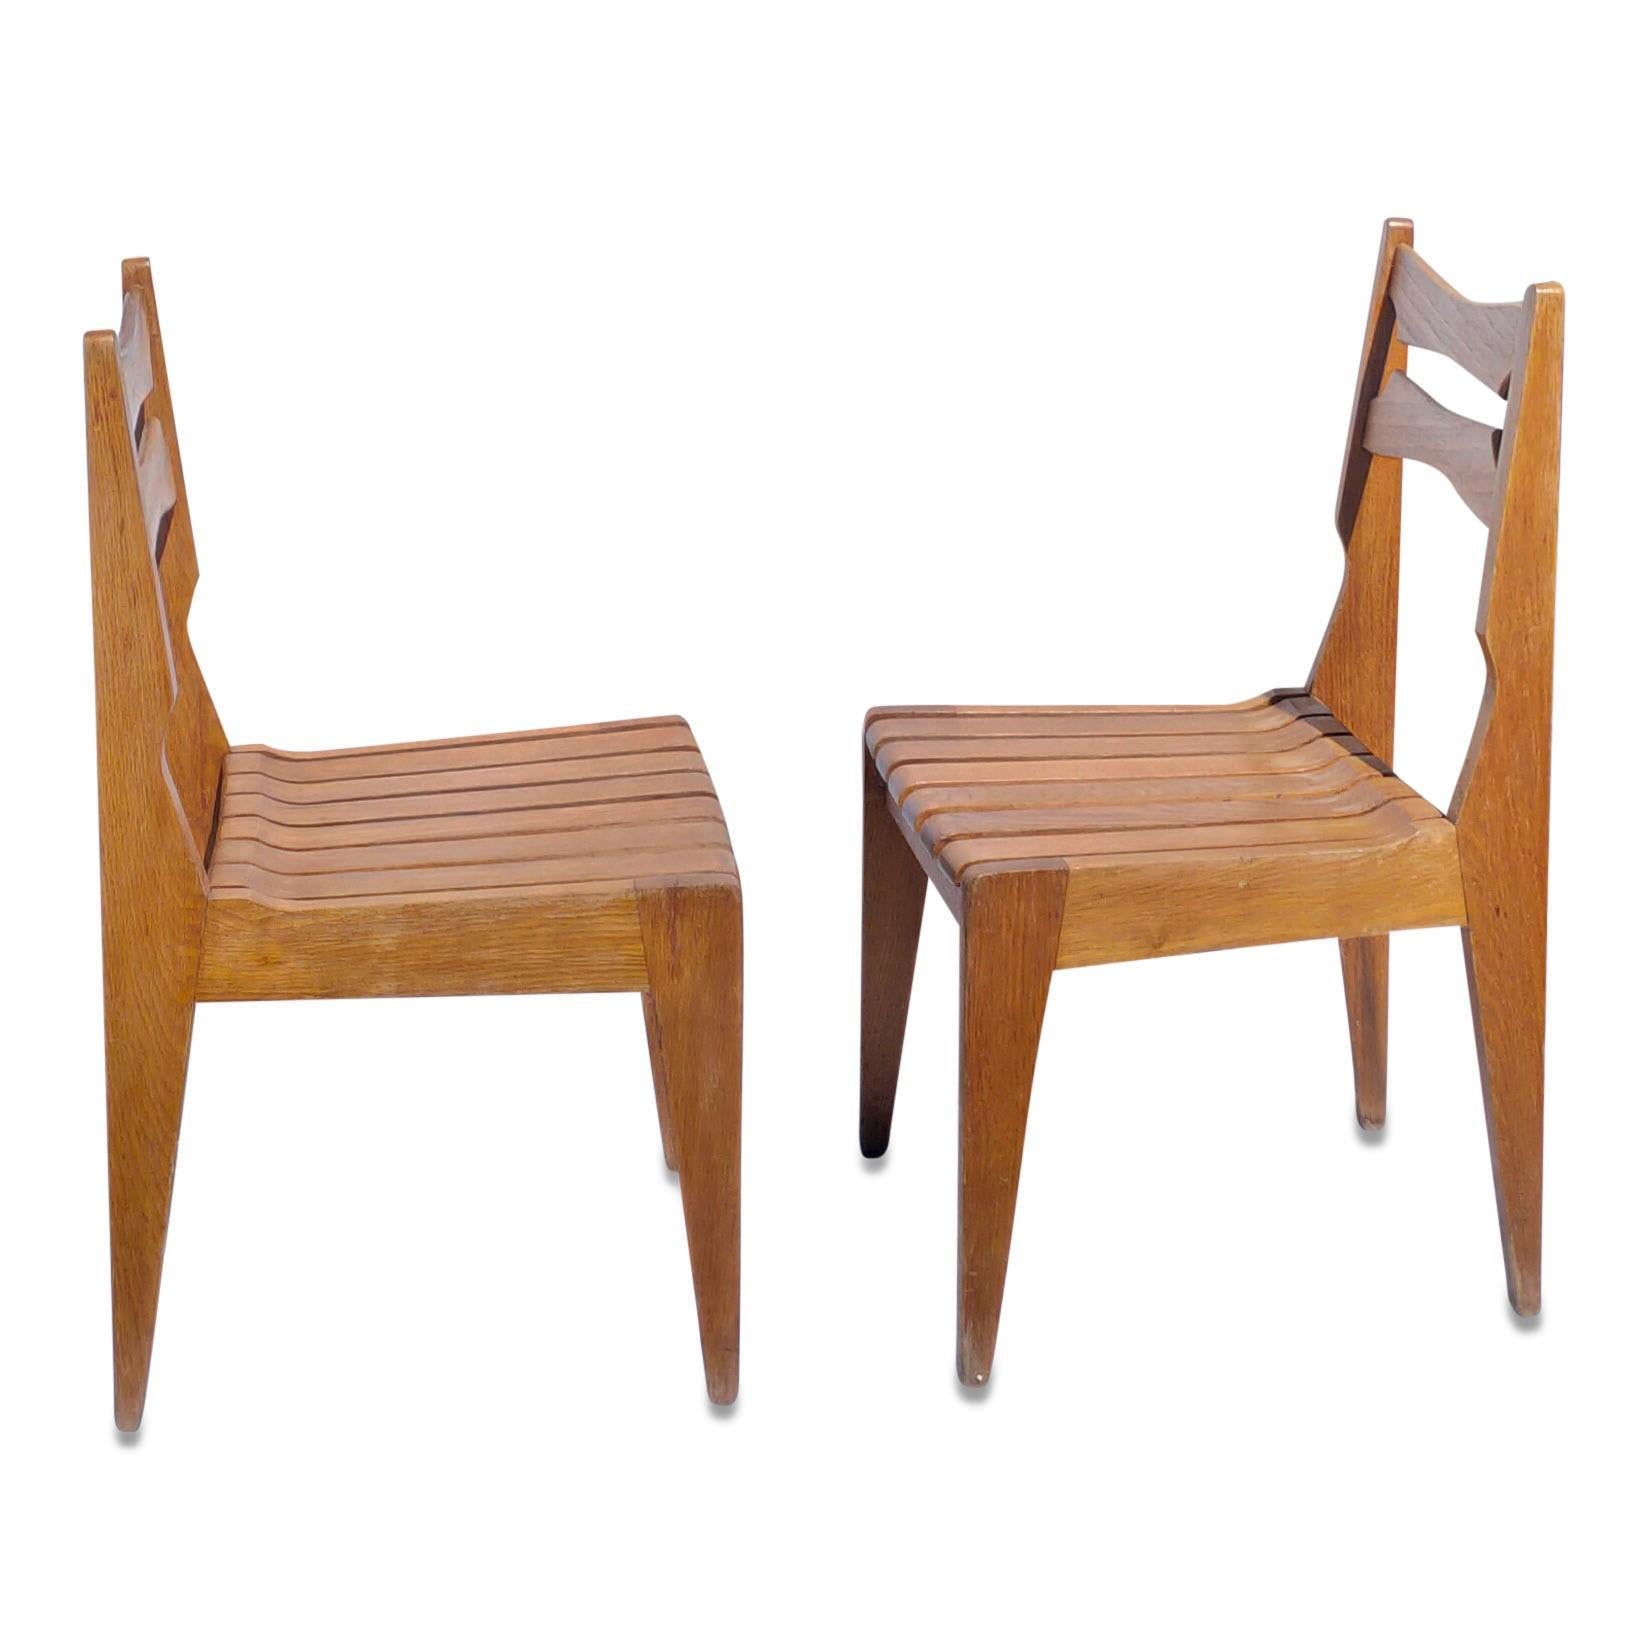 Mid-20th Century Set of 4 Solid Oak Slats Chairs by Guillerme & Chambron, France, 1960s For Sale